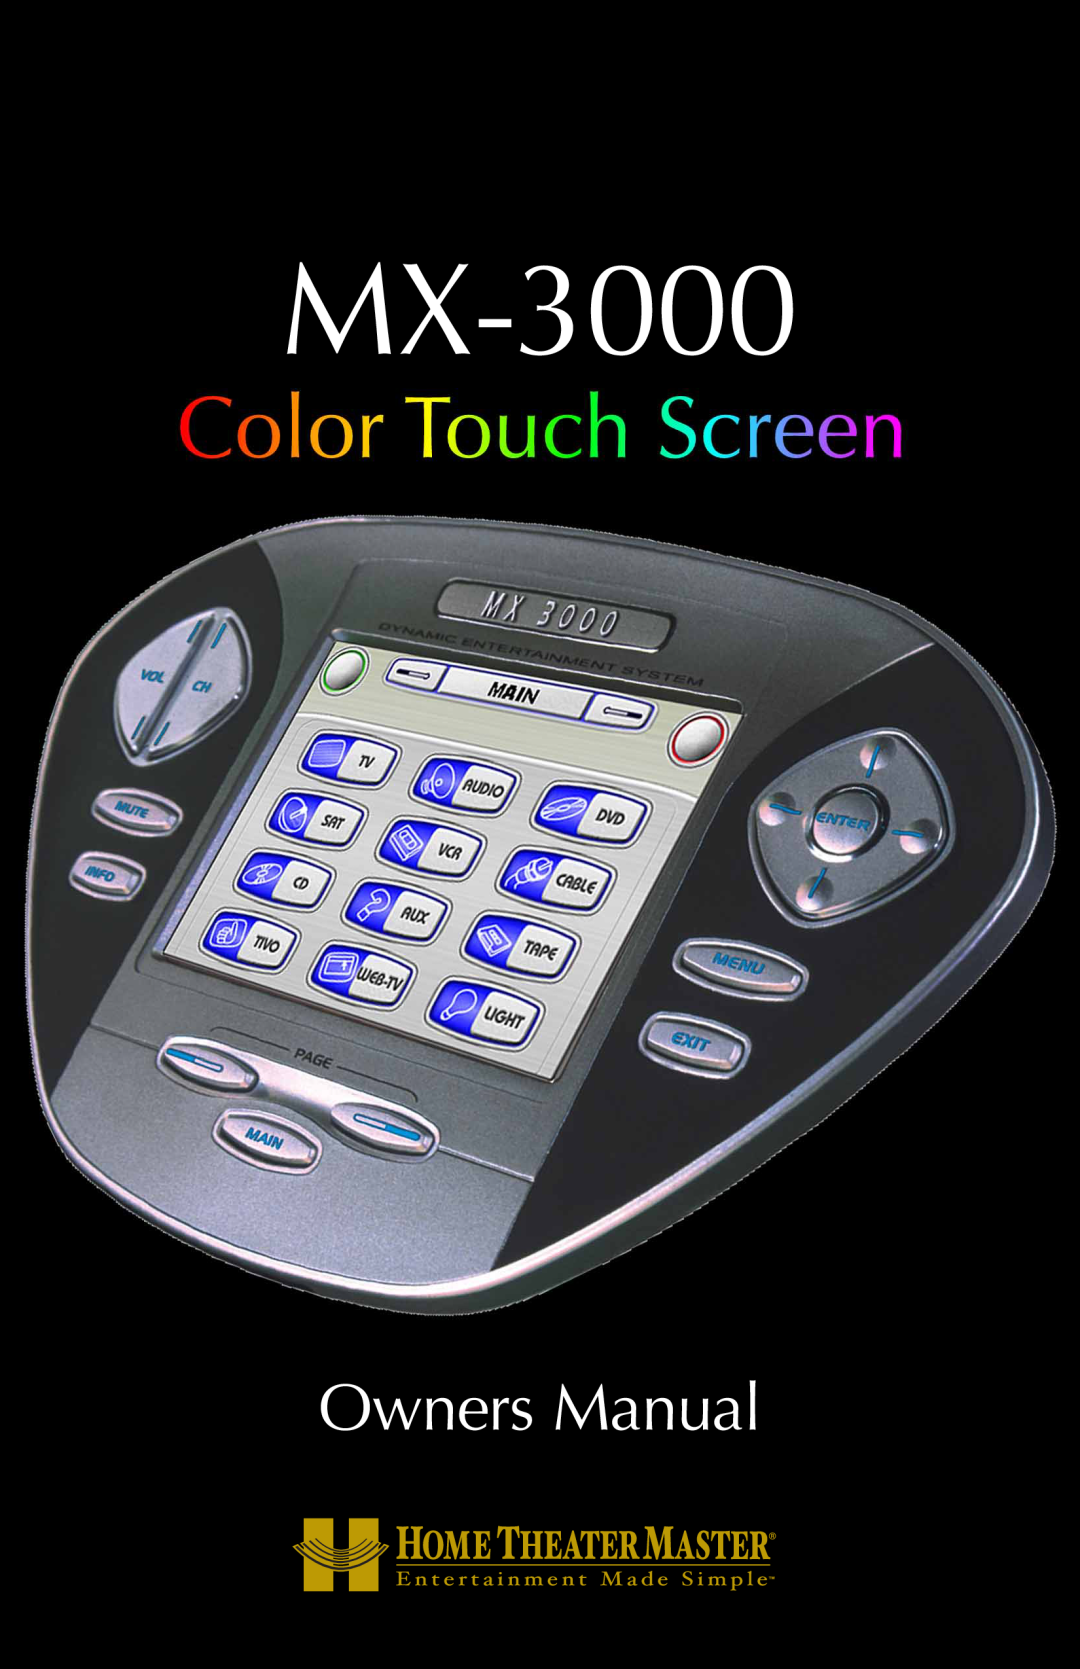 Universal Remote Control MX-3000 owner manual MRF-250, Owners Manual, Multi-Room “No-Pointing” RF Control 